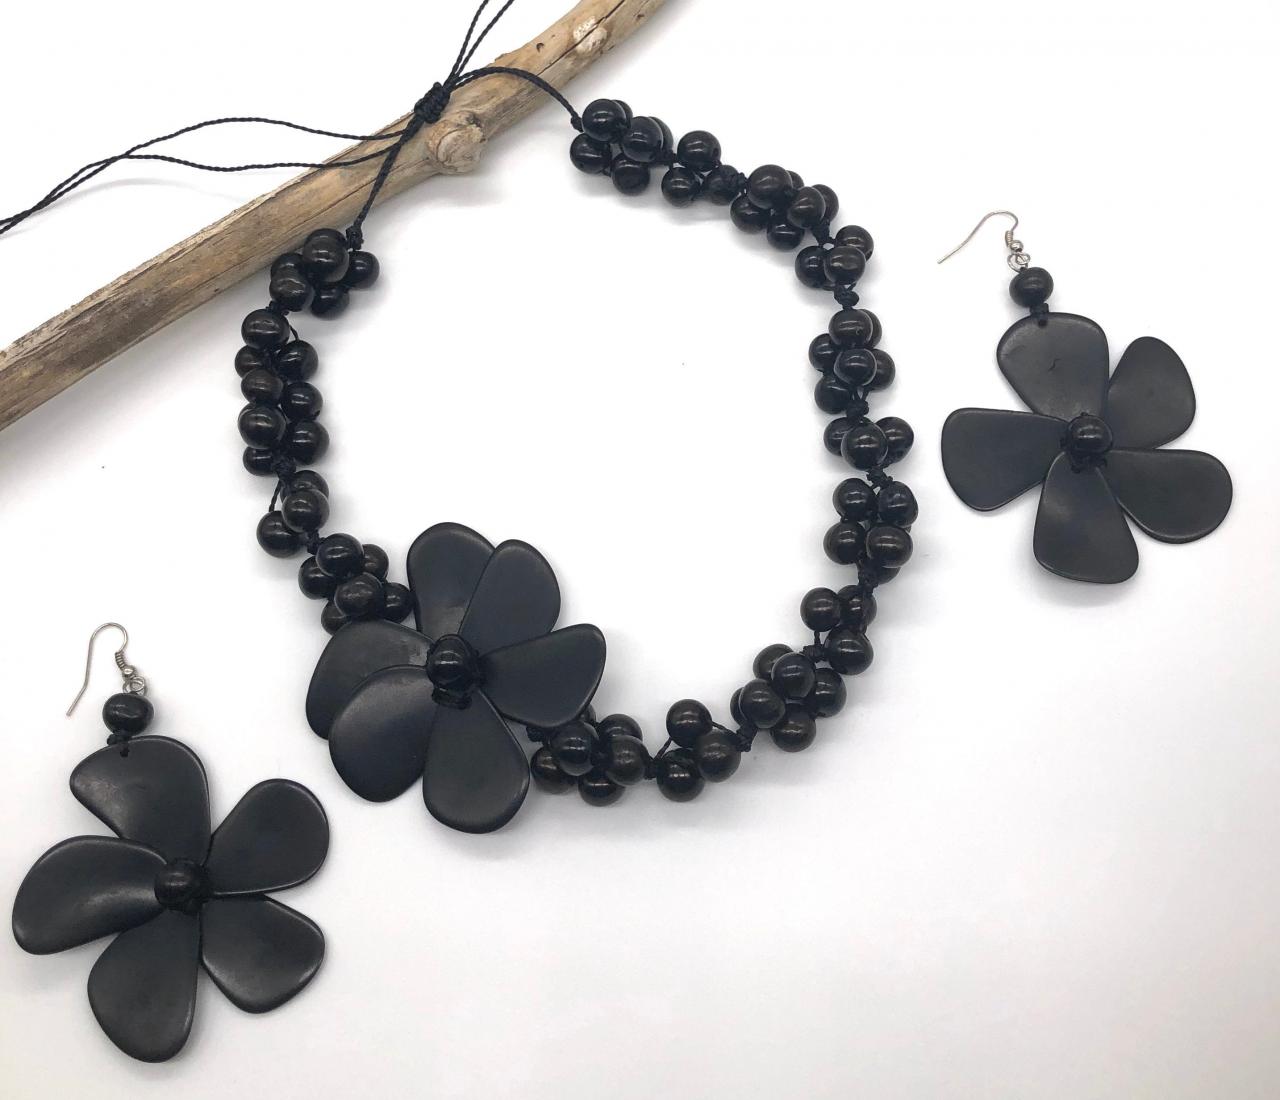 Black Tagua Necklace And Earrings, Acai Seeds Necklace, Summer Necklace, Vegan Necklace, Flower Necklace, Beach Necklace, Statement